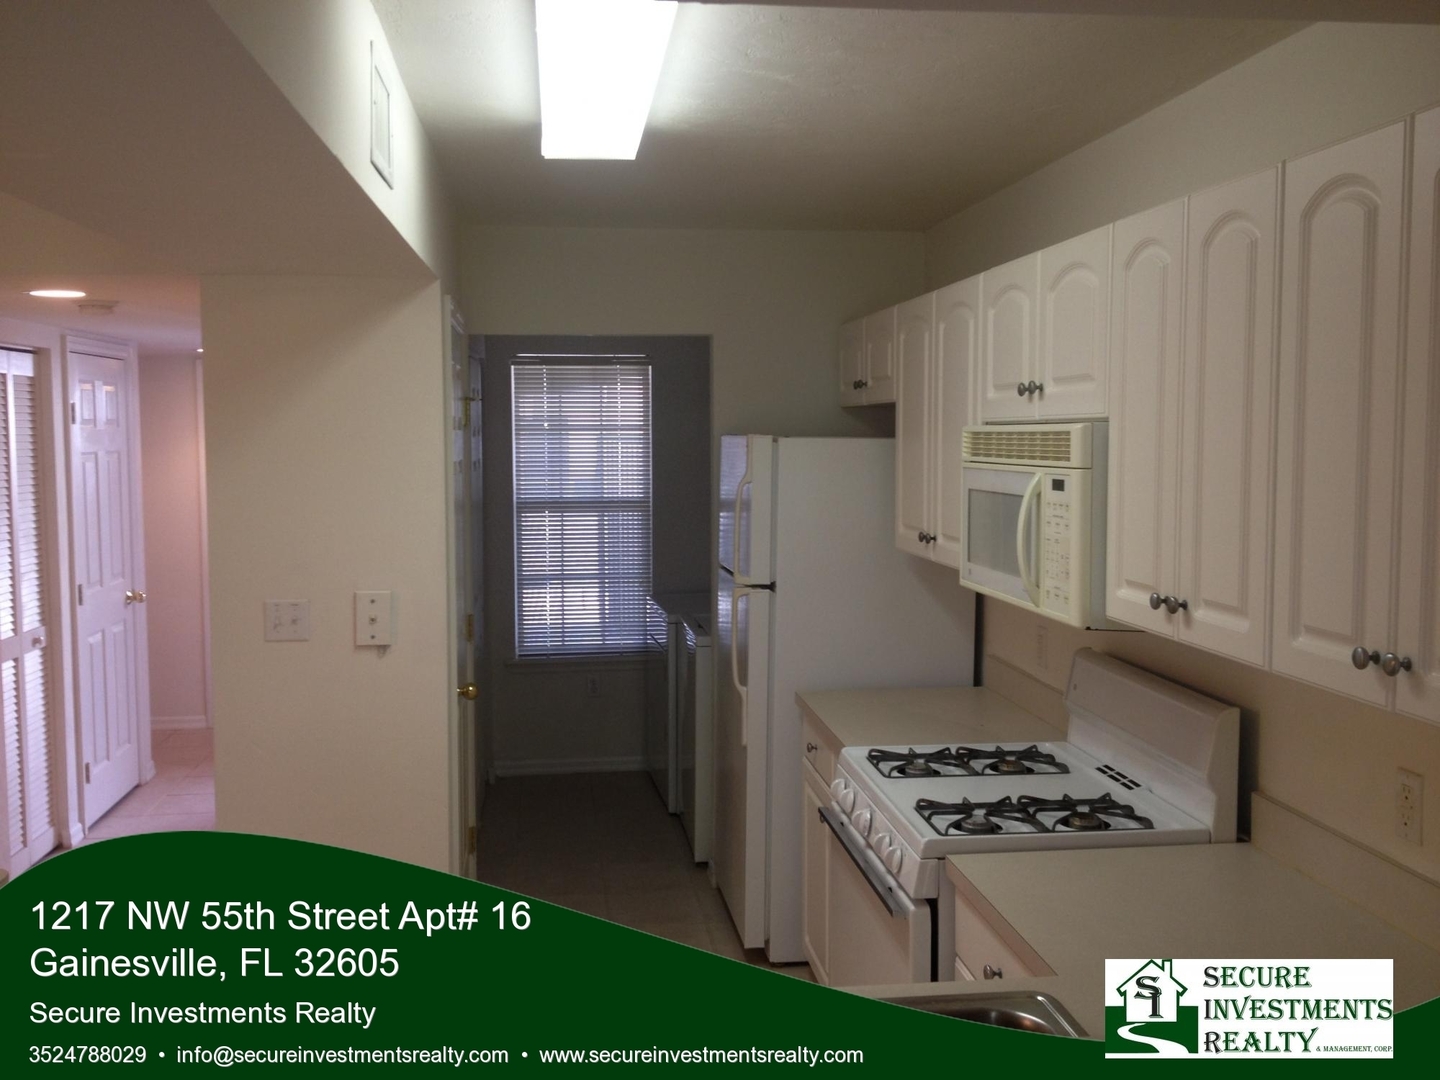 Nice condo in quiet small community close to shopping, Sante Fe and Buchholz High